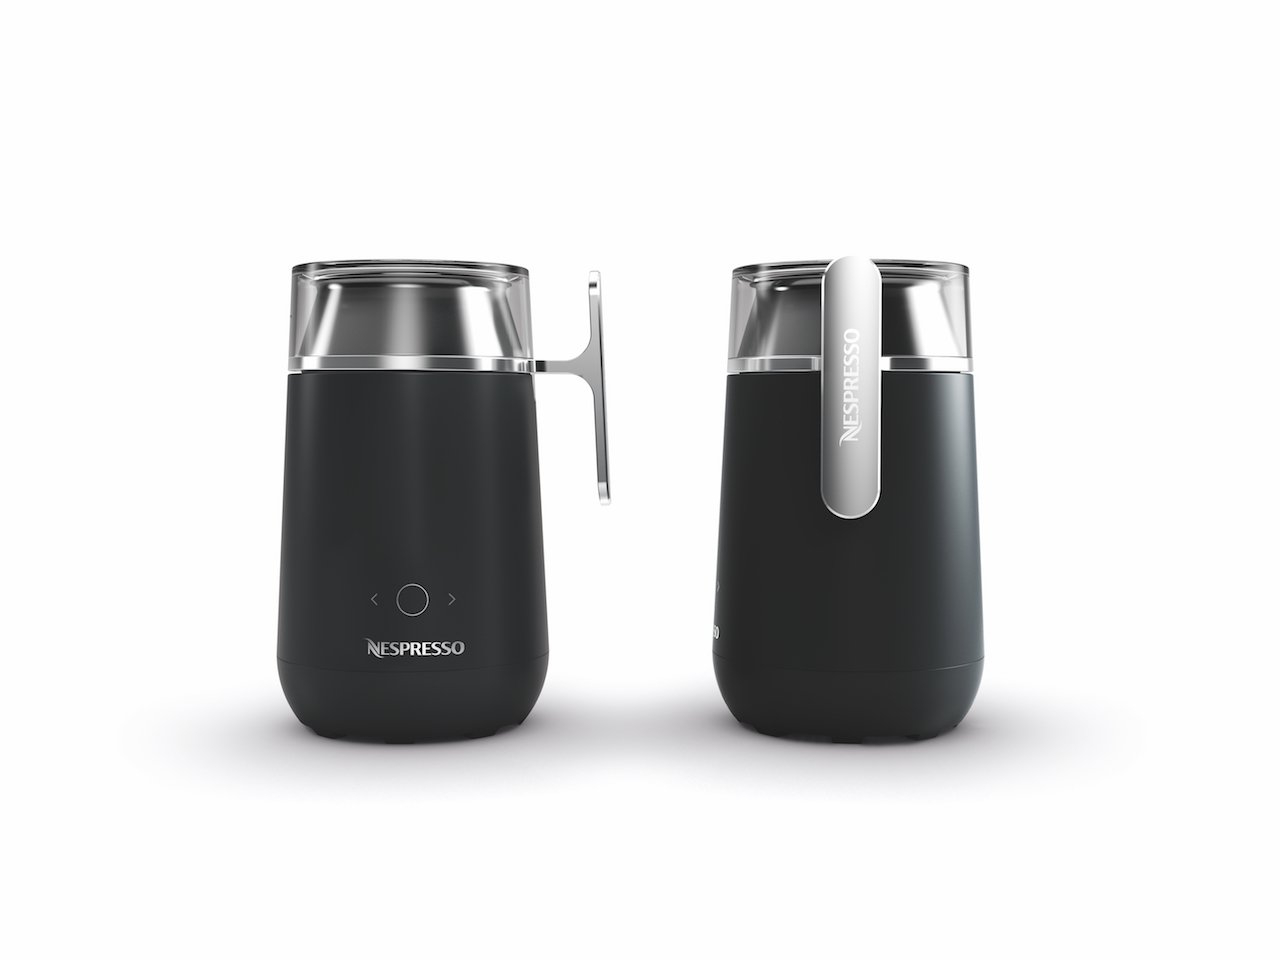 Is The Nespresso Barista Milk Frother Worth The Price? Our Review